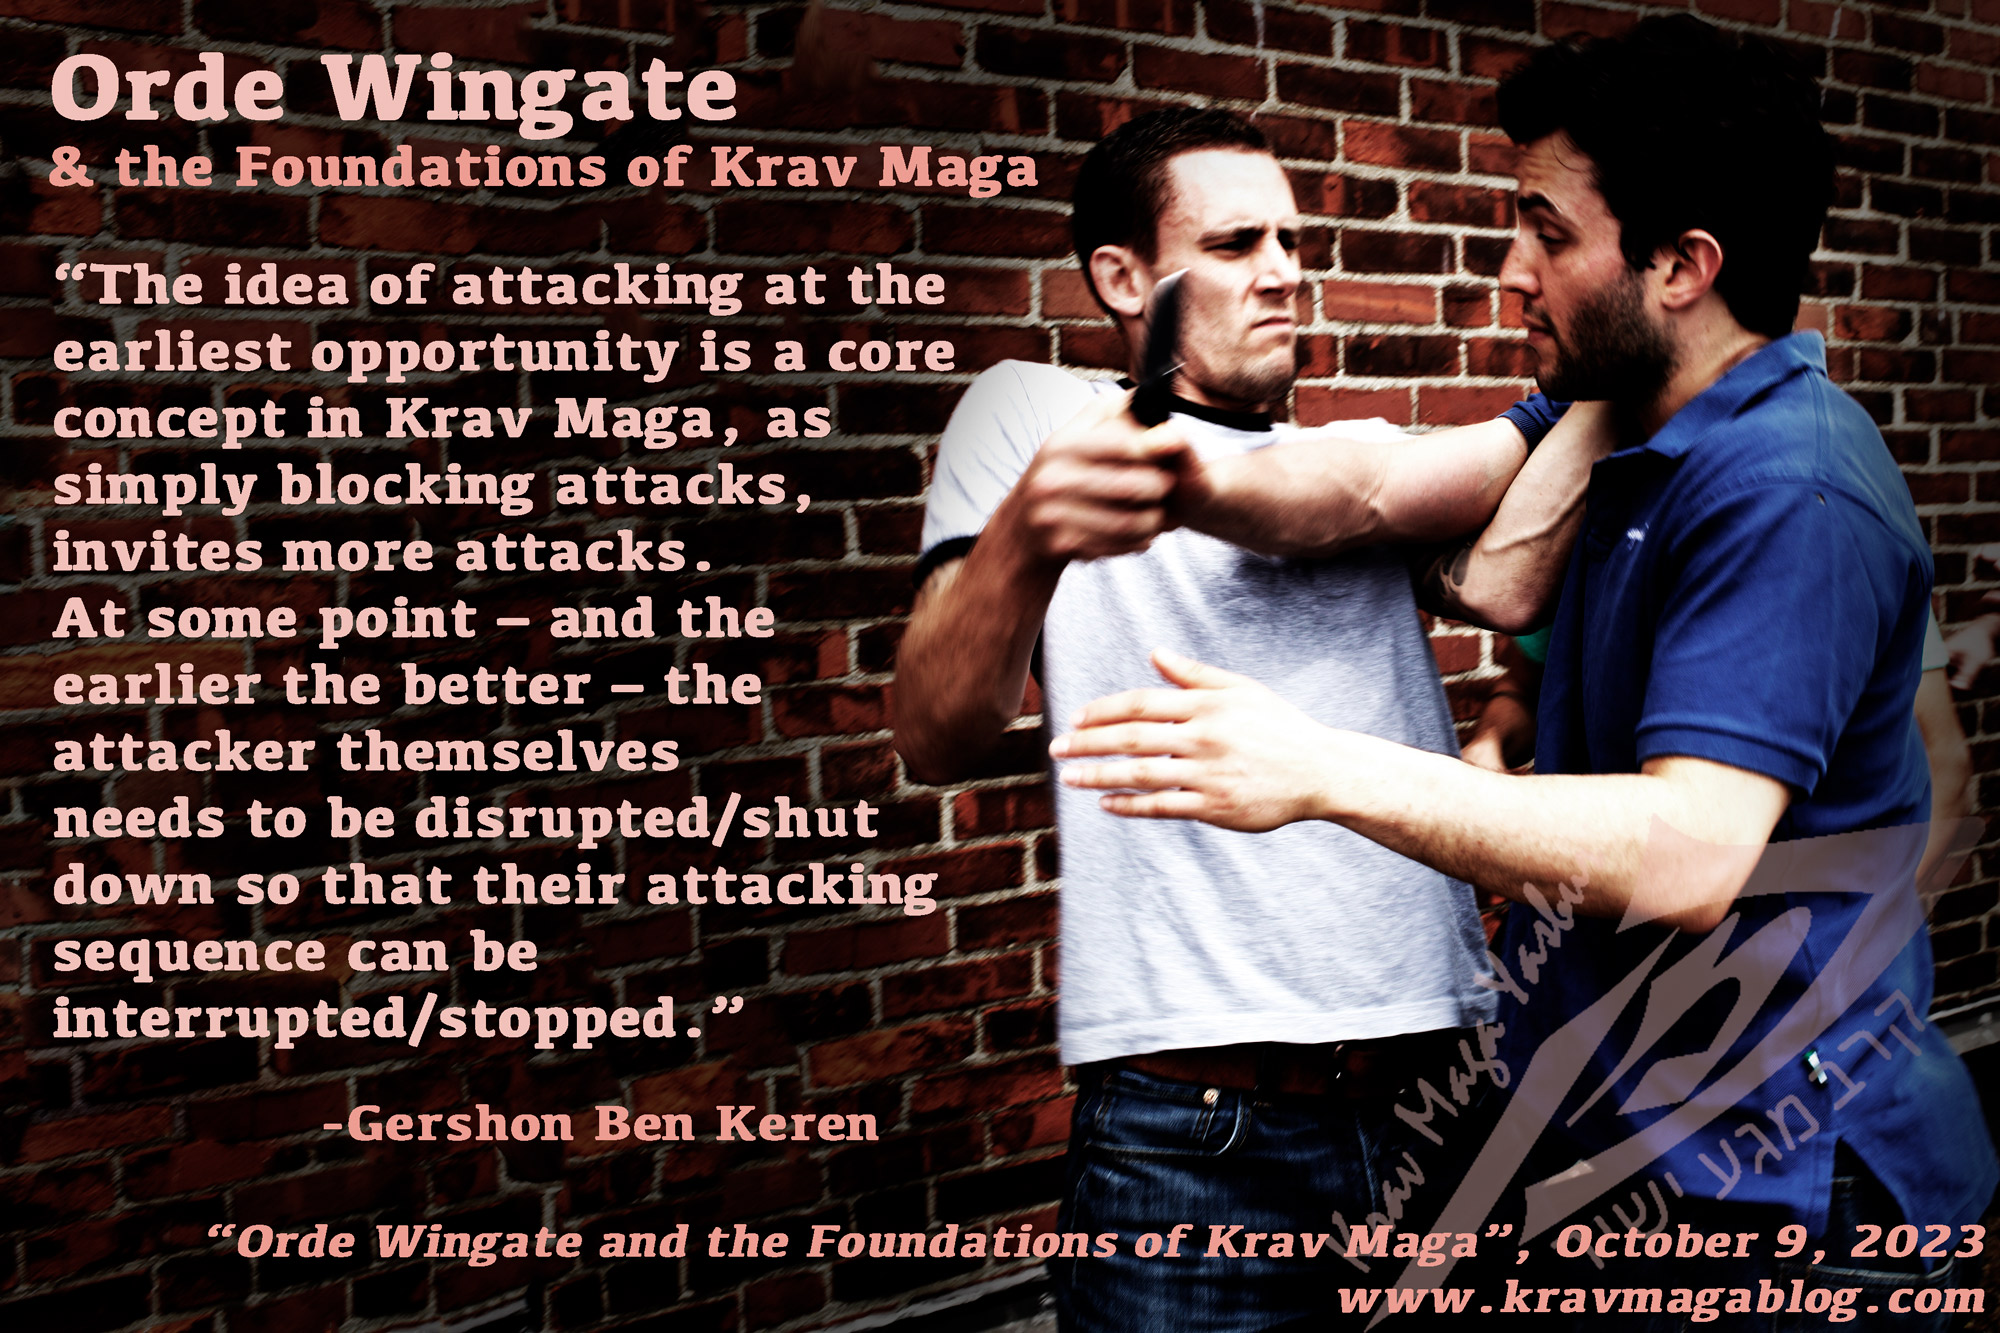 Blog About Orde Wingate & The Foundations of Krav Maga